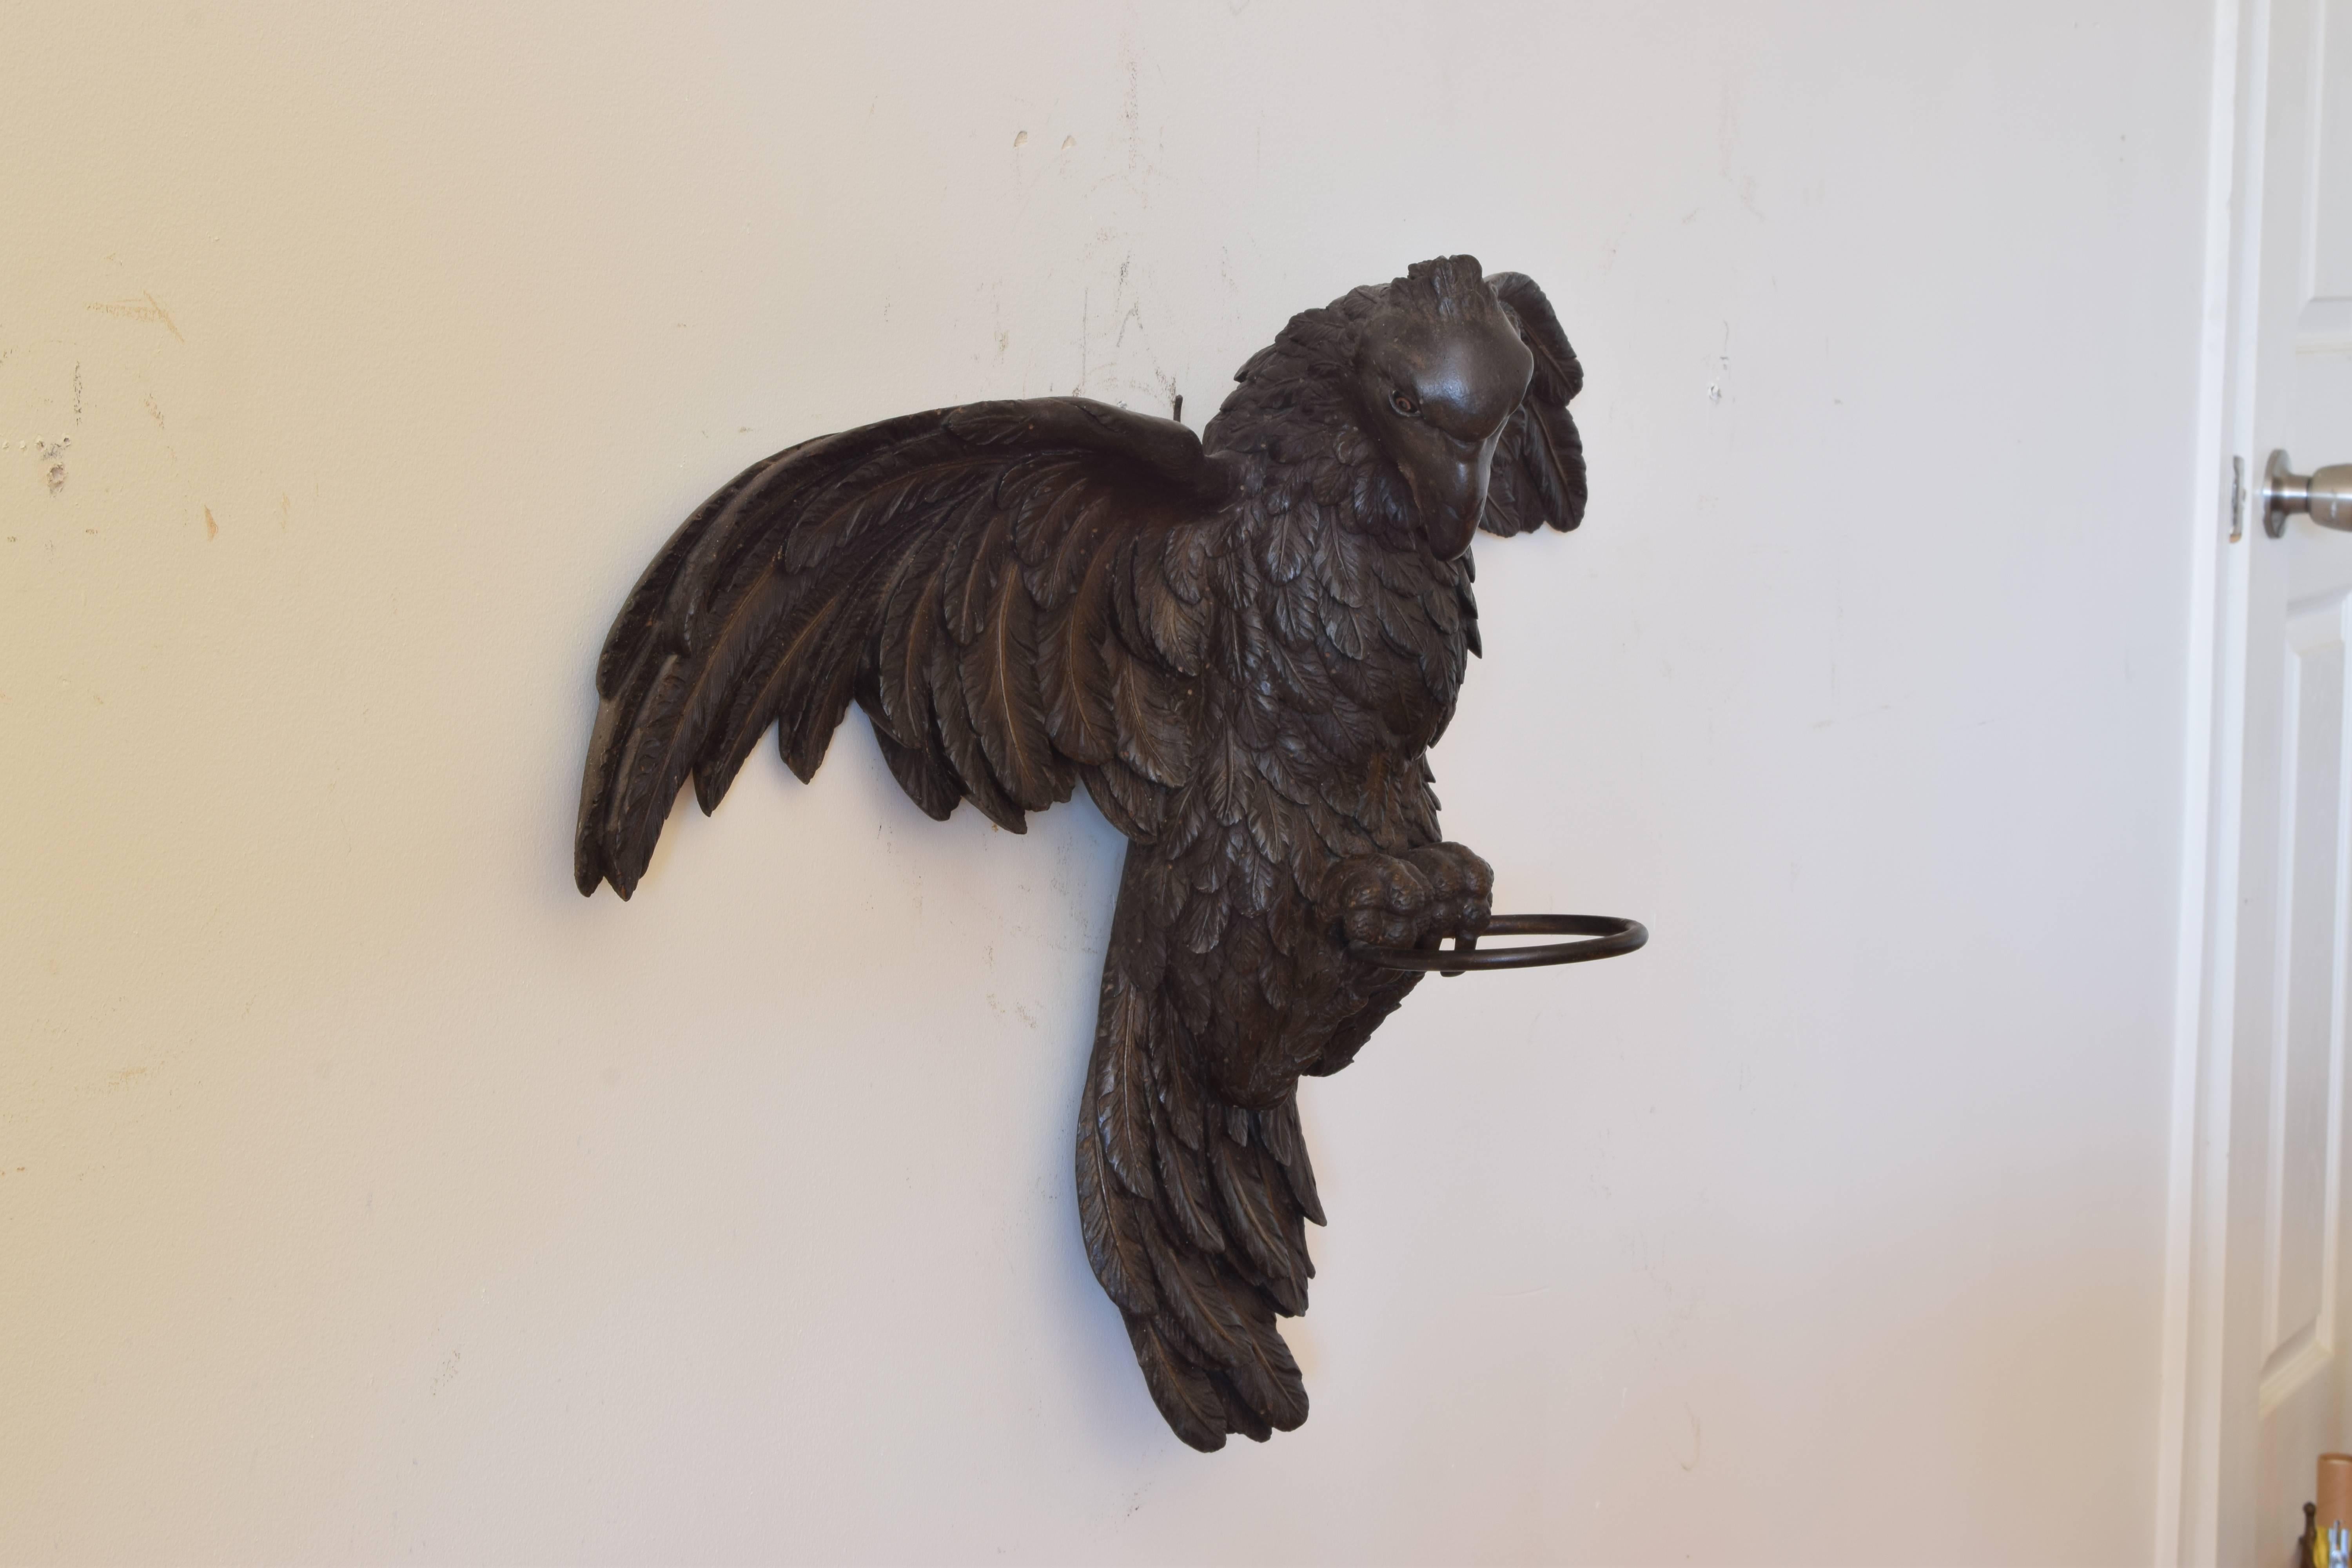 Early 19th Century Italian Empire Period, Naples, Carved Wooden Eagle, circa 1800